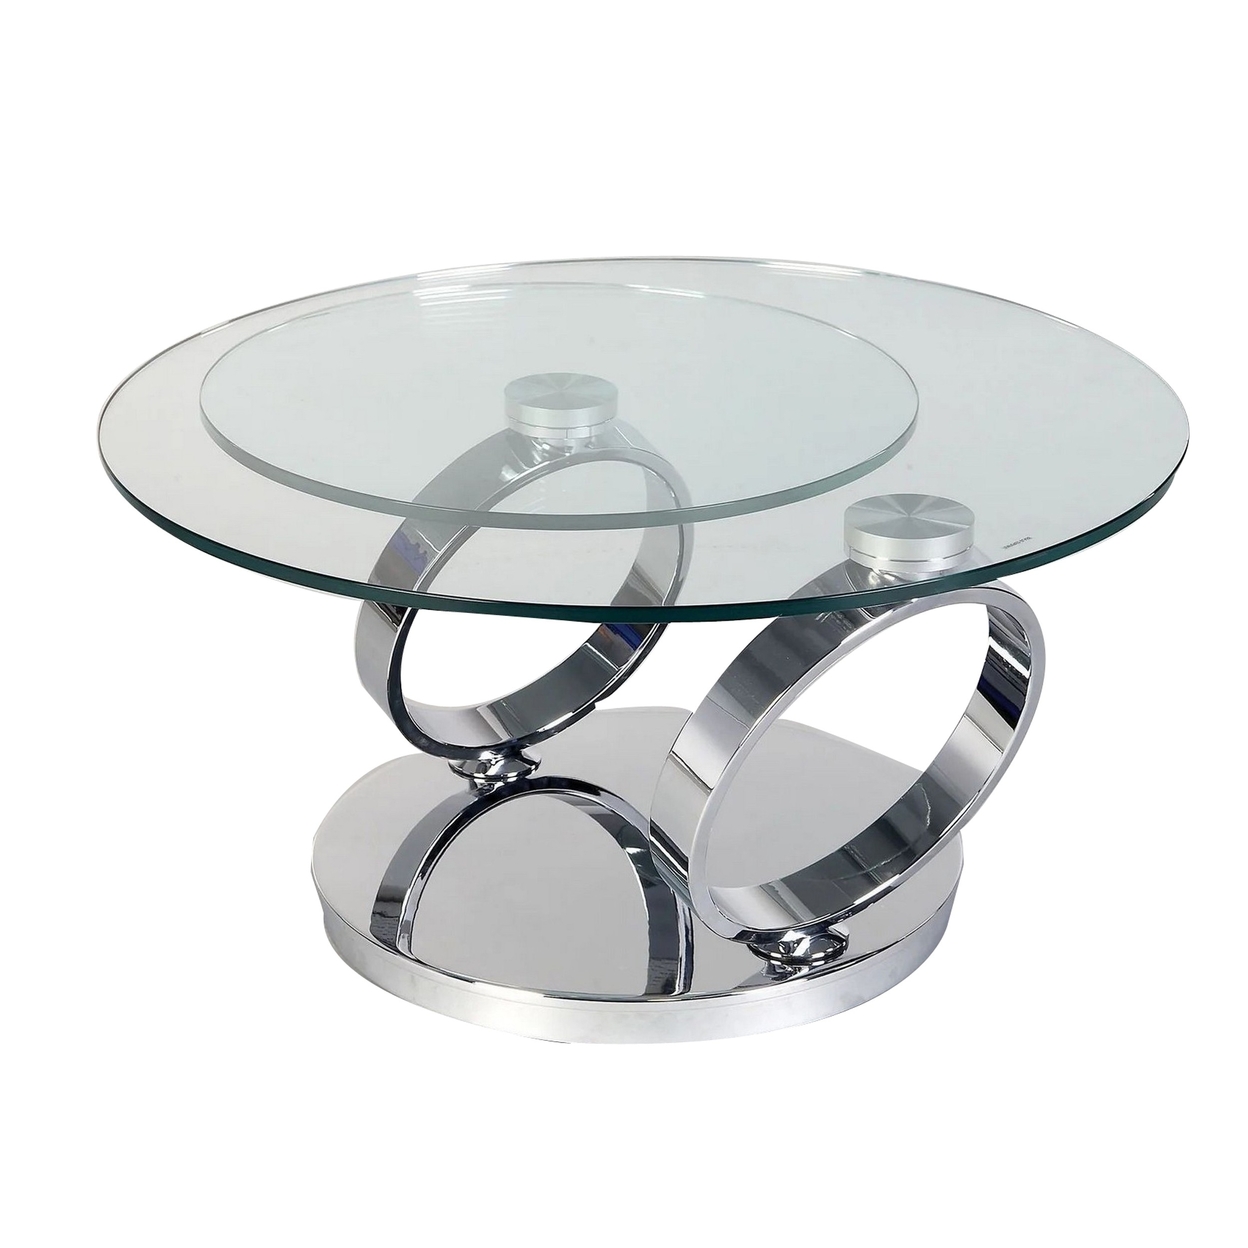 Puf 32-53 Inch Extendable Coffee Table, 2 Round Tempered Glass Tops, Chrome - Saltoro Sherpi